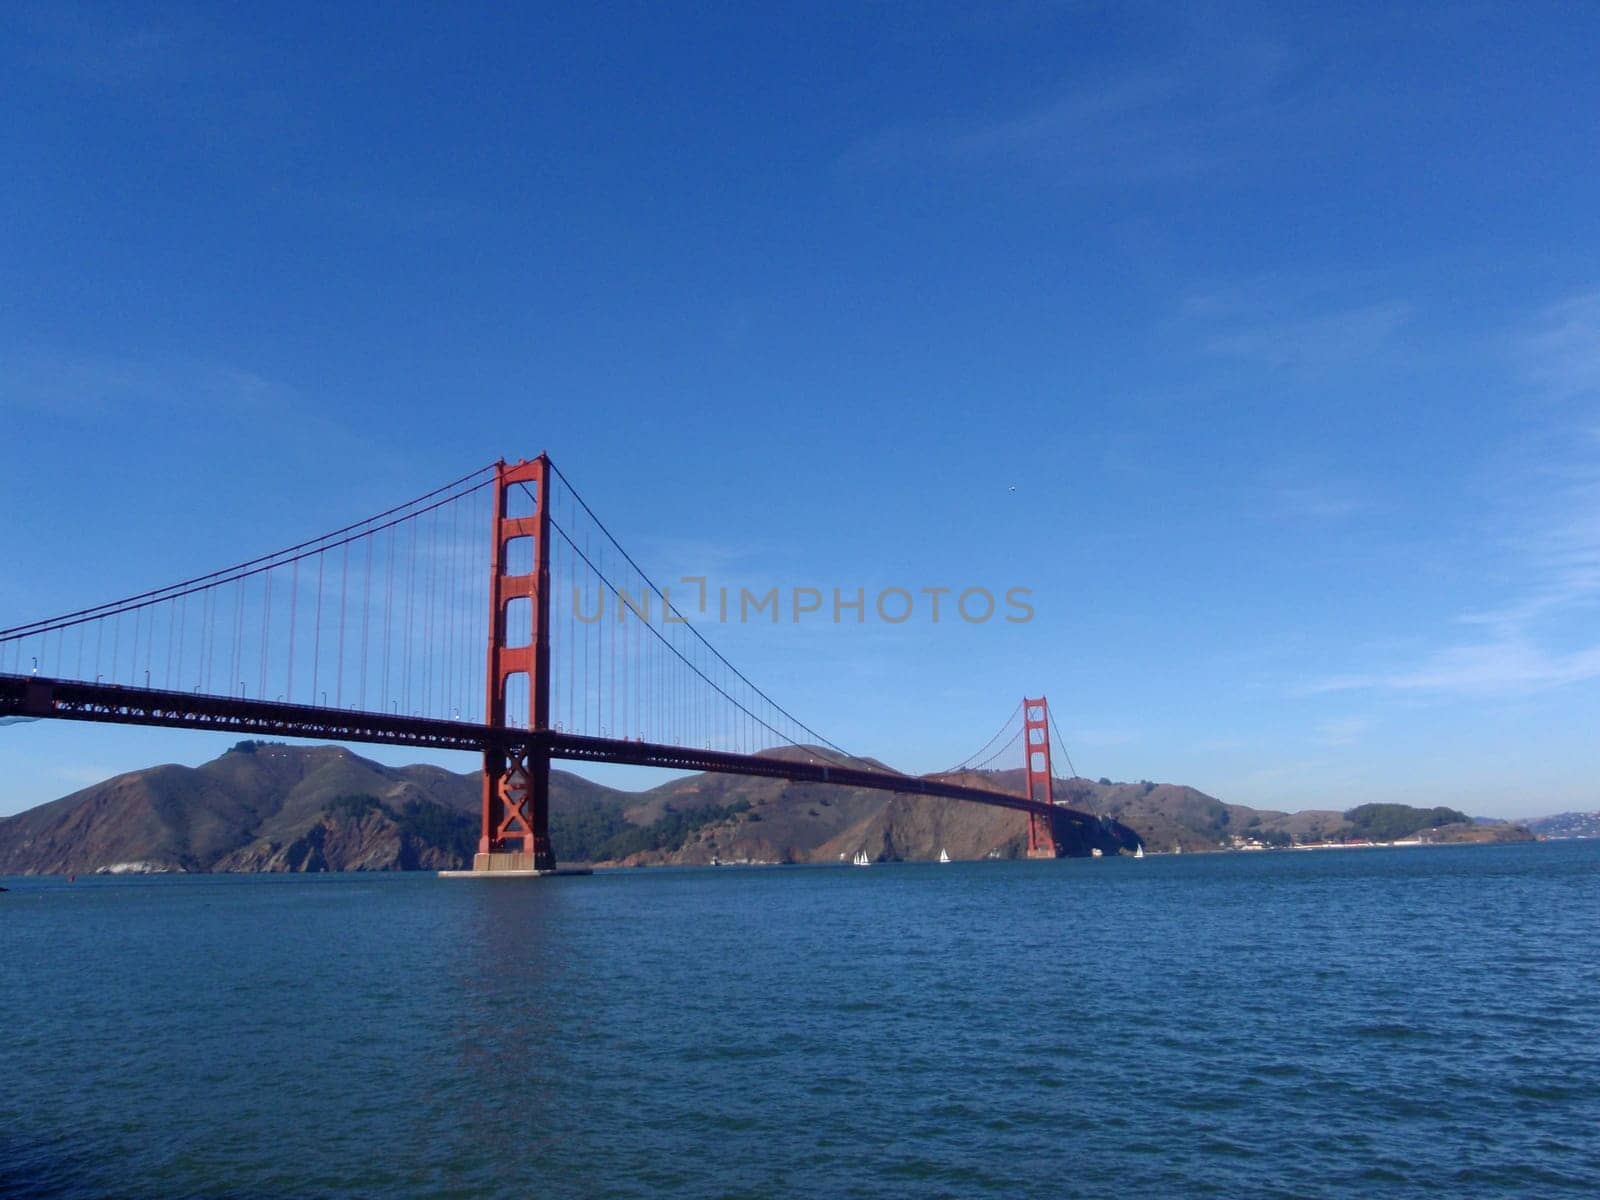 The iconic Golden Gate Bridge in San Francisco, California on a clear day with blue skies and calm waters.